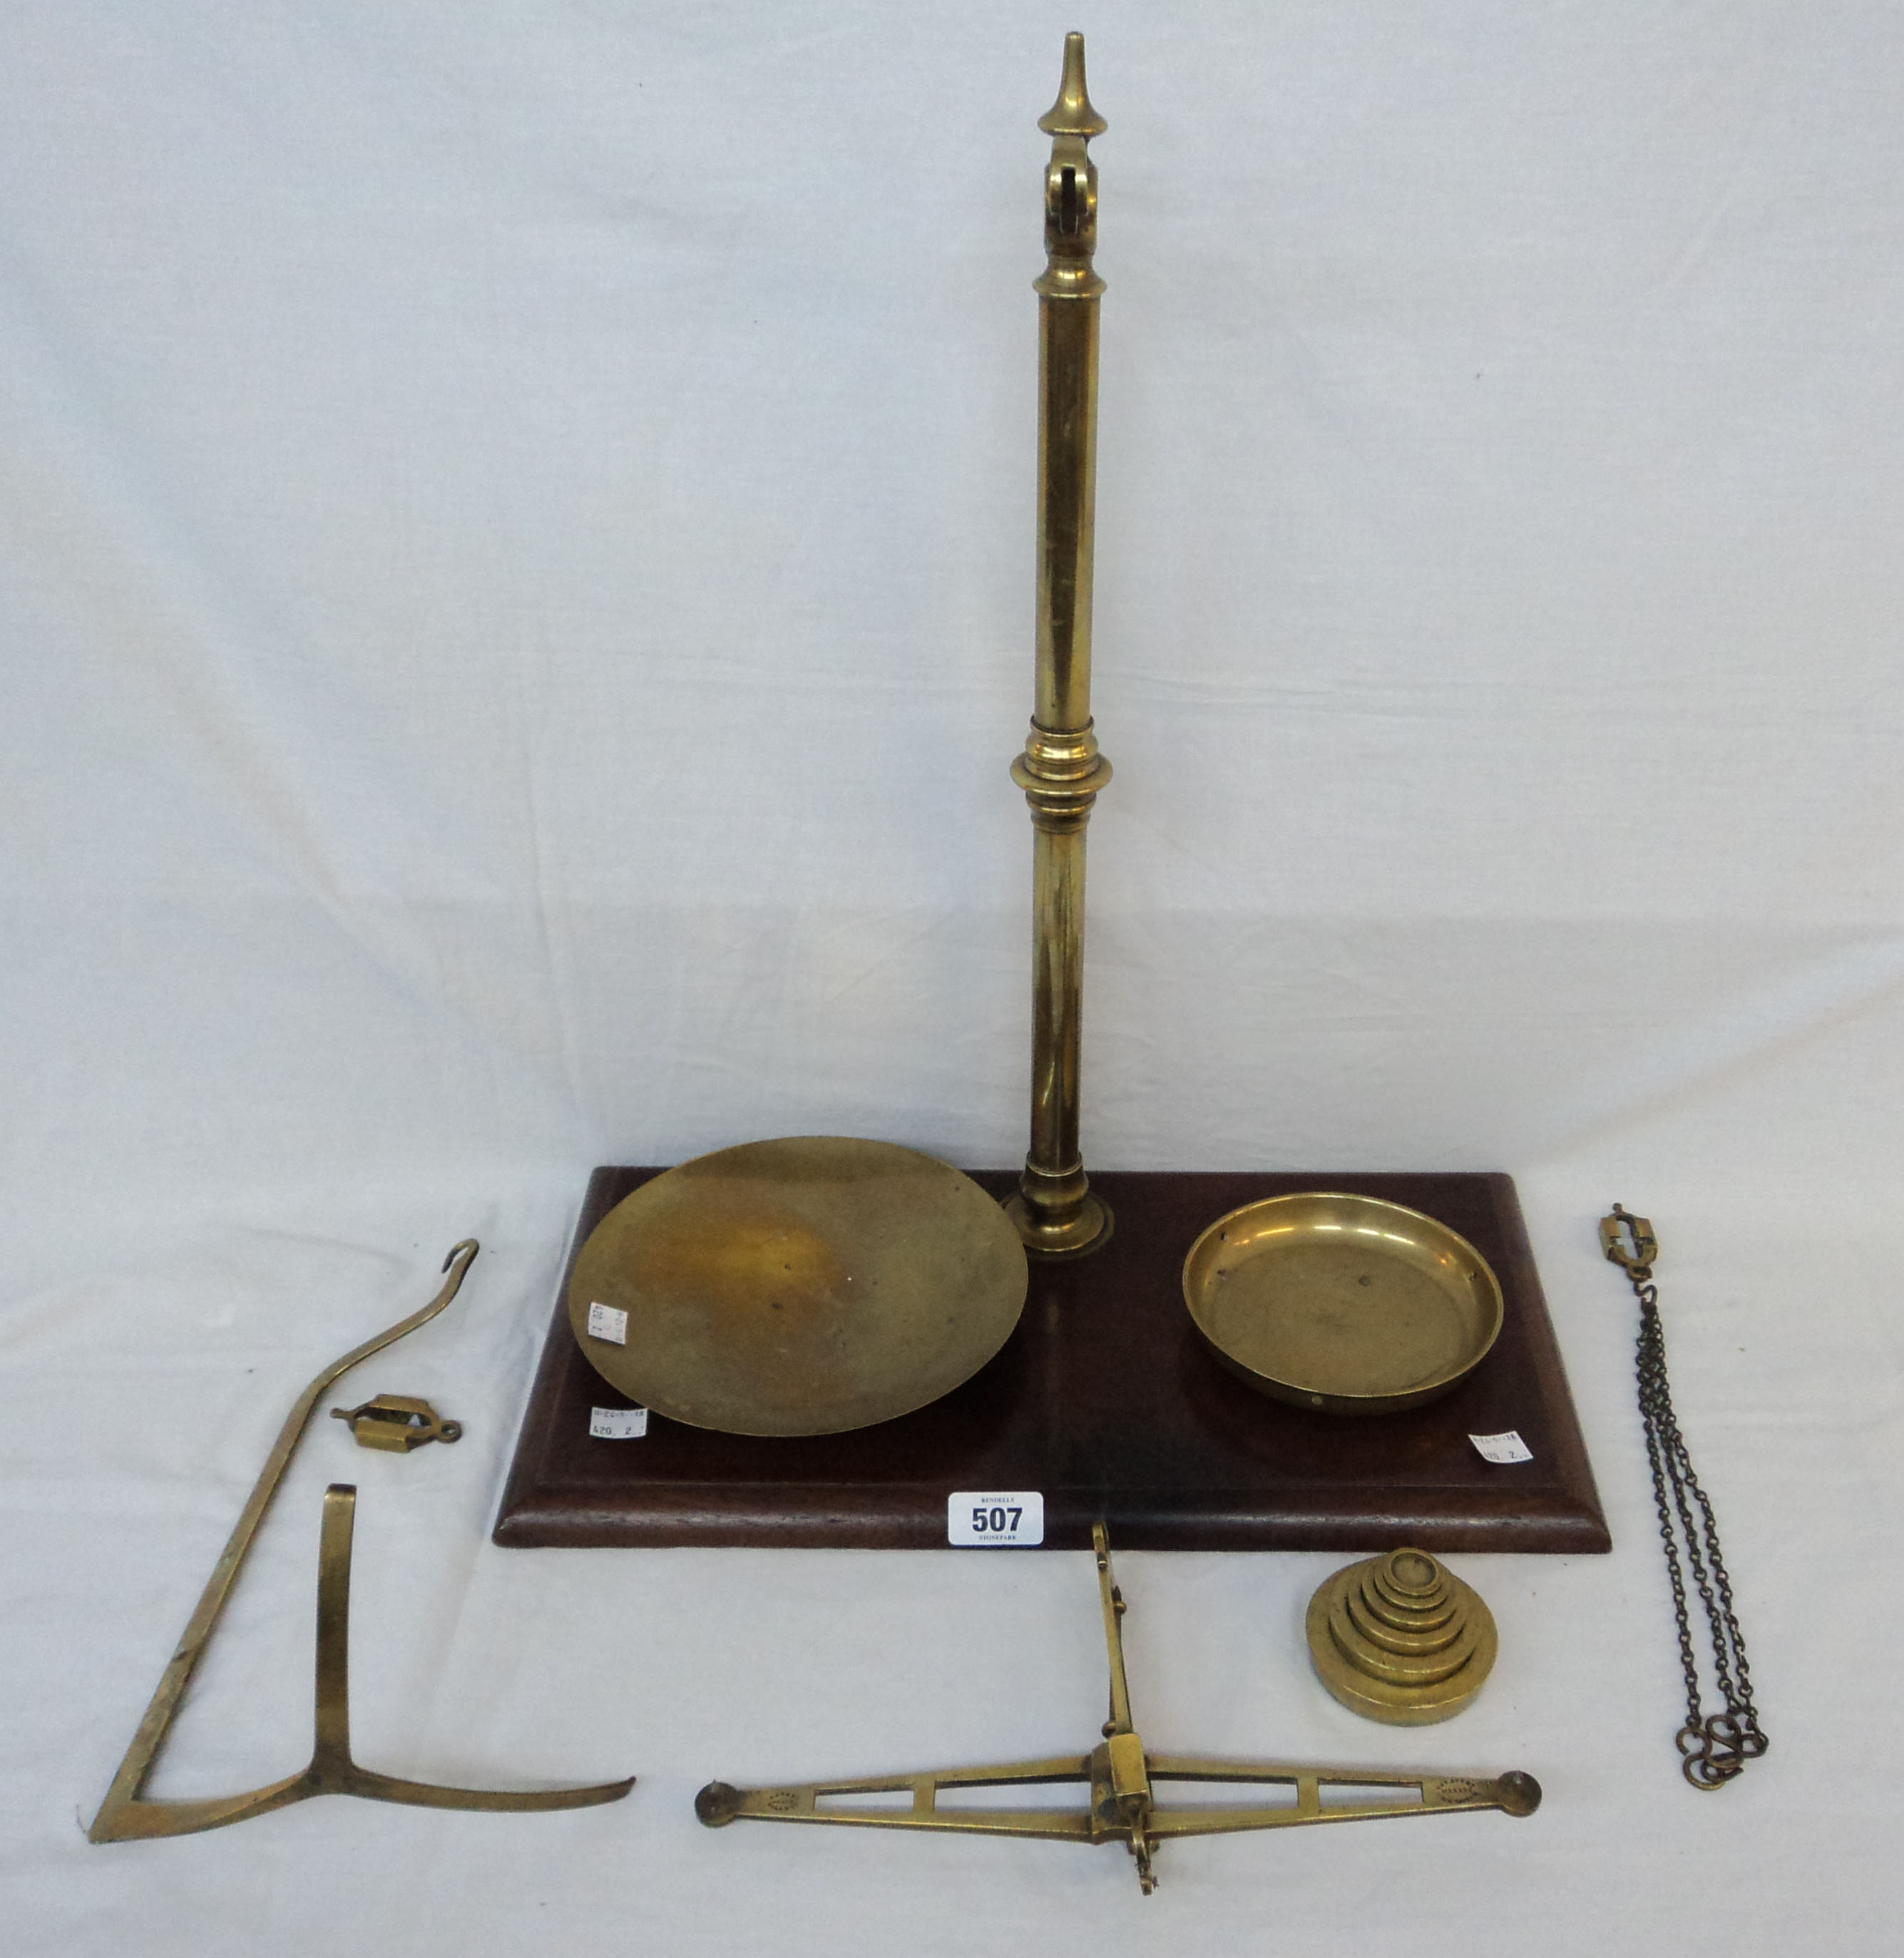 A large set of W. & T. Avery brass balance scales and weights - pin missing